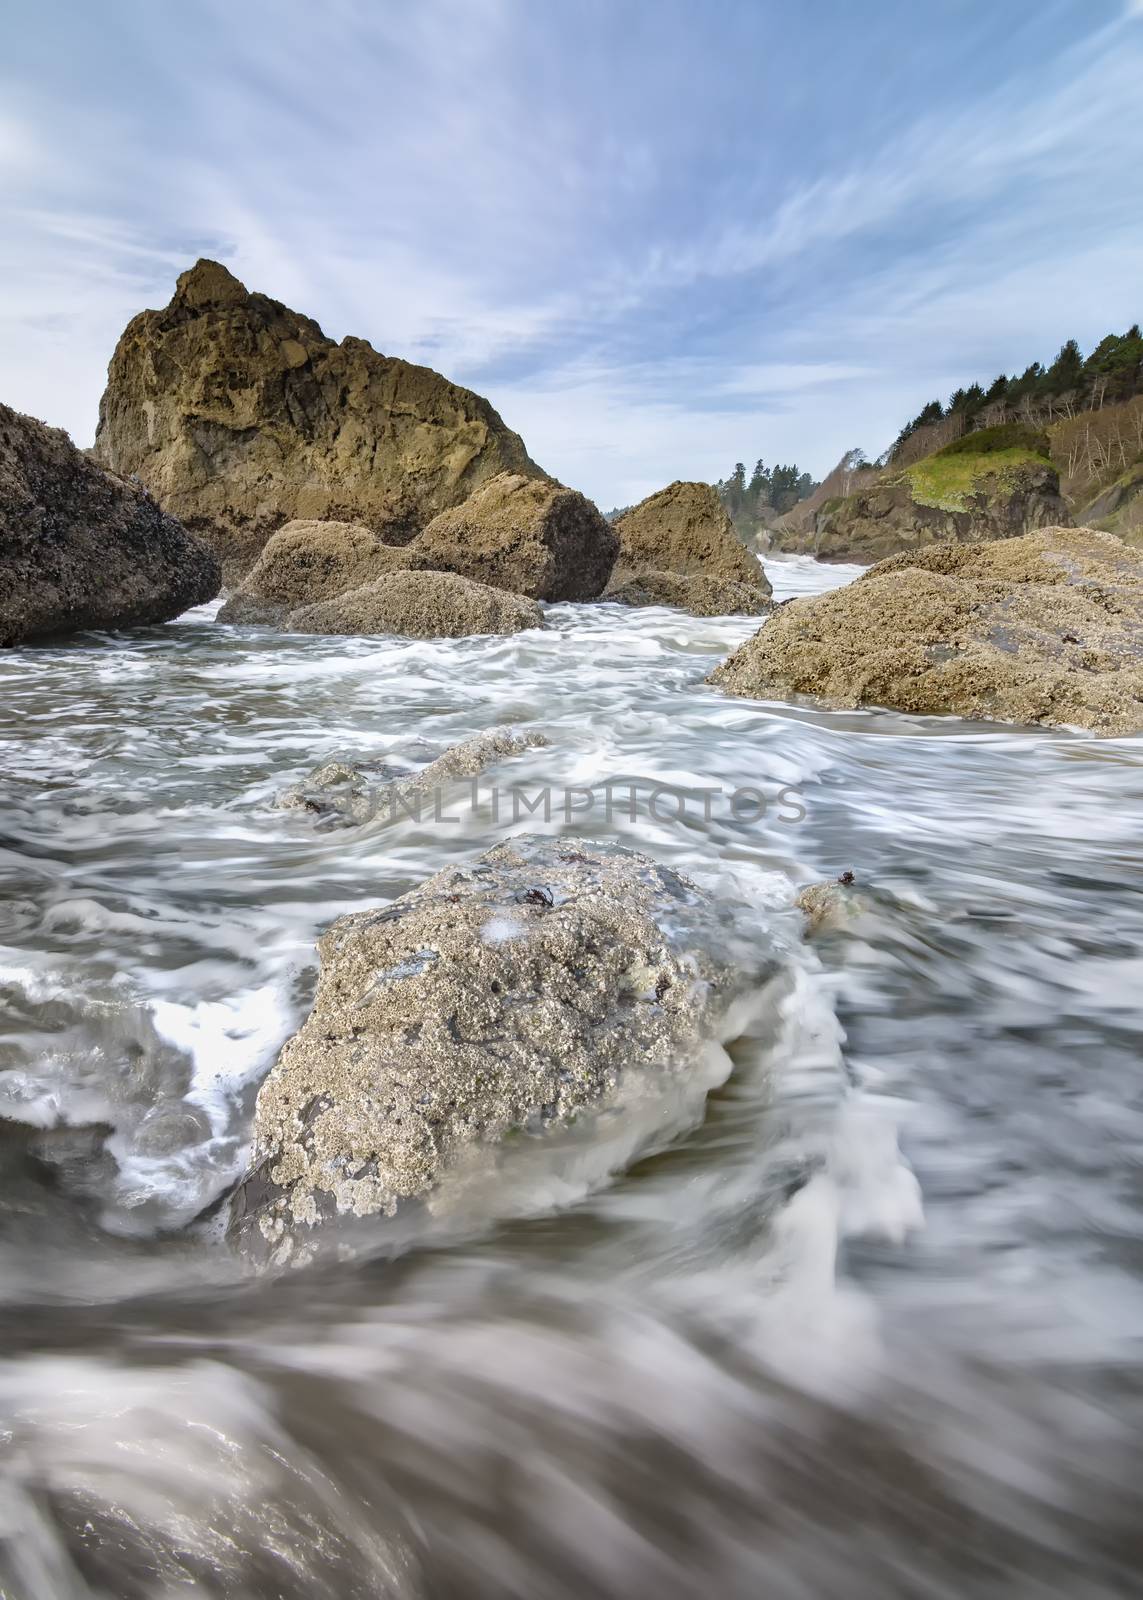 This is a color landscape photo of the Pacific Ocean at a rocky beach.